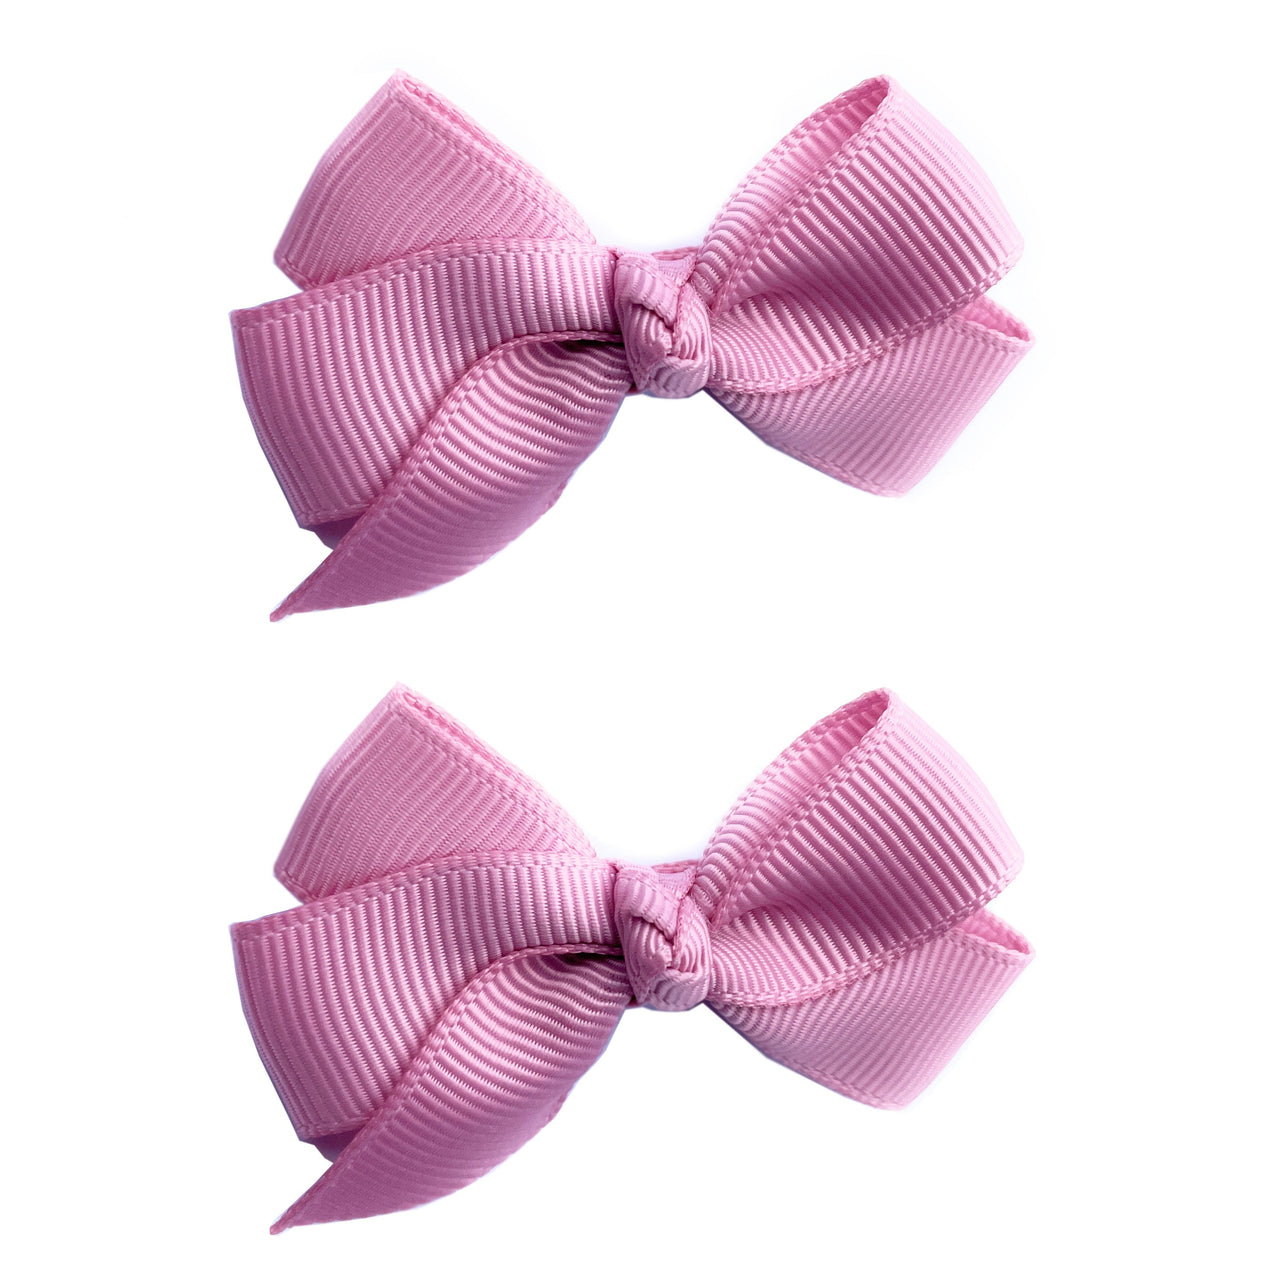 Aiyanna Boutique Grosgrain Ribbon Bows - Alligator Clip Pigtail Pair - Spring Colors Baby Wisp